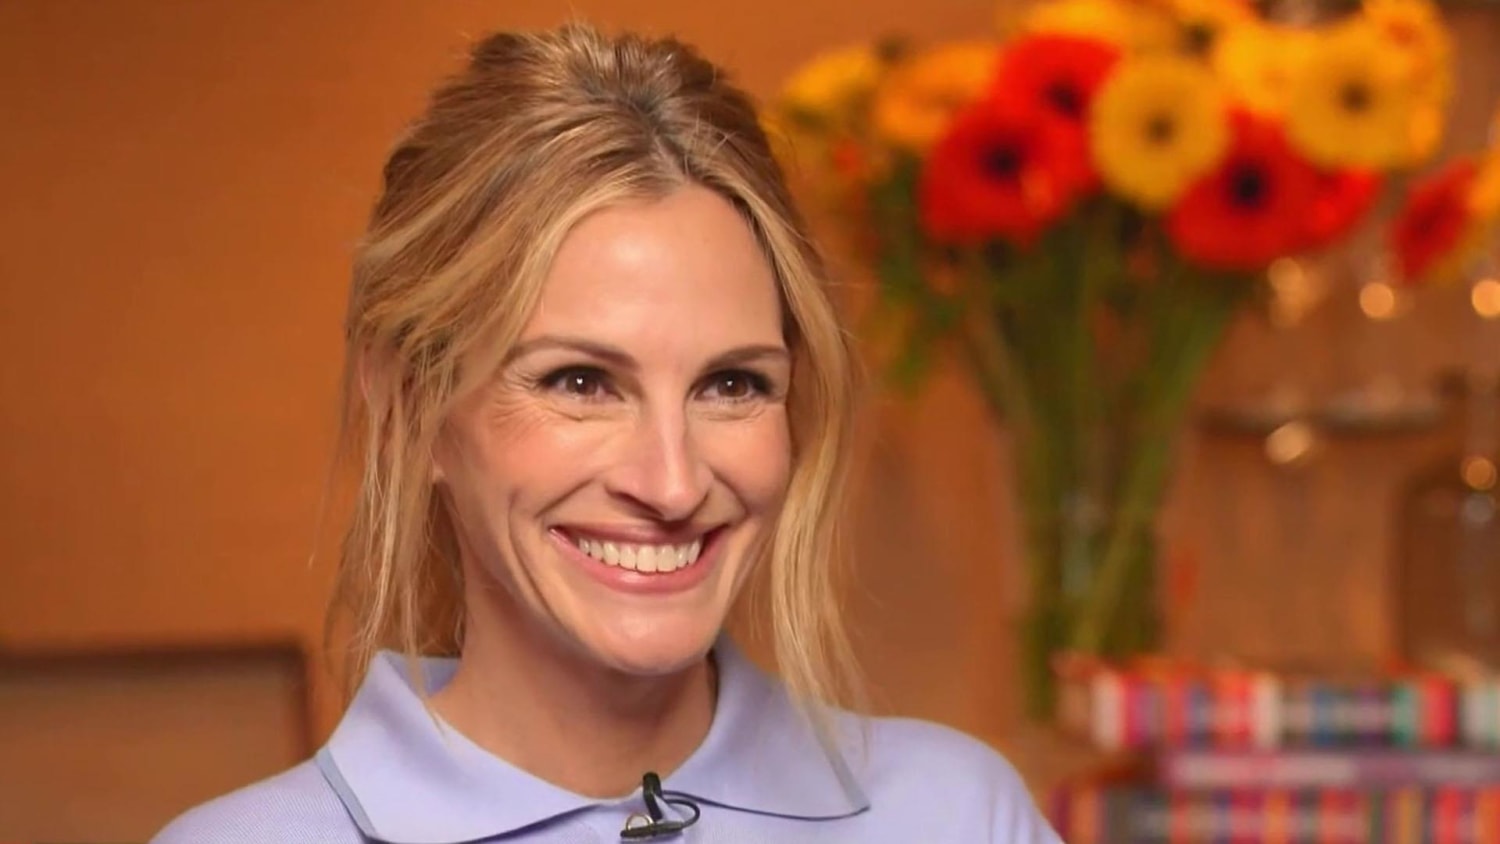 Julia Roberts Explains Why She Hasn't Been in a Rom-Com in 20 Years